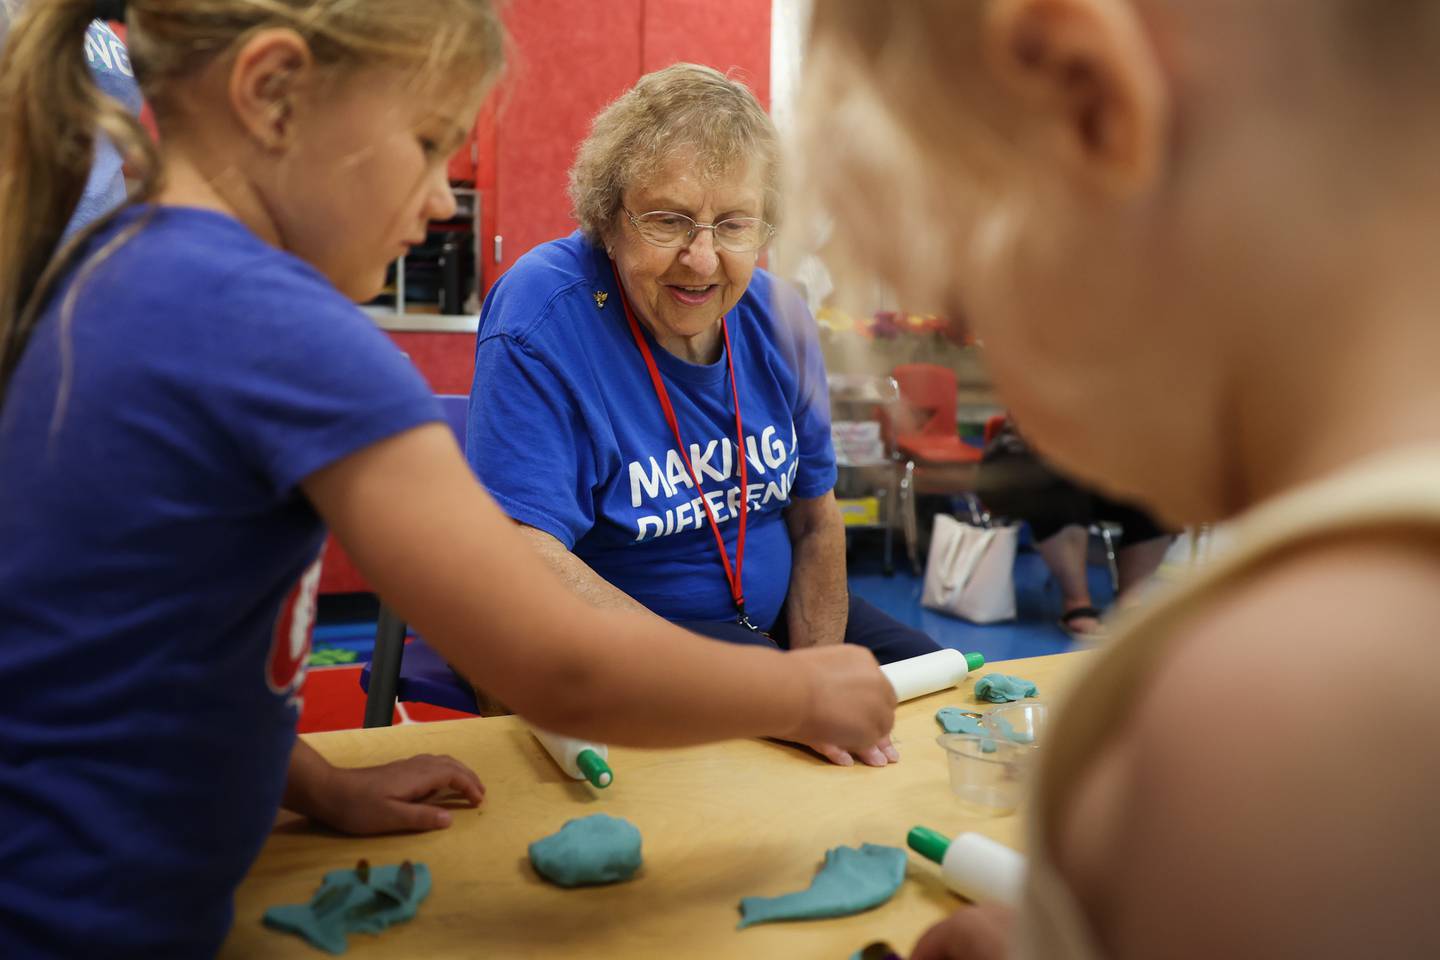 Volunteer Shirley Anderson helps with the Playdough activity at the C.W. Avery YMCA summer camp in Plainfield. Wednesday, July 20, 2022 in Plainfield.